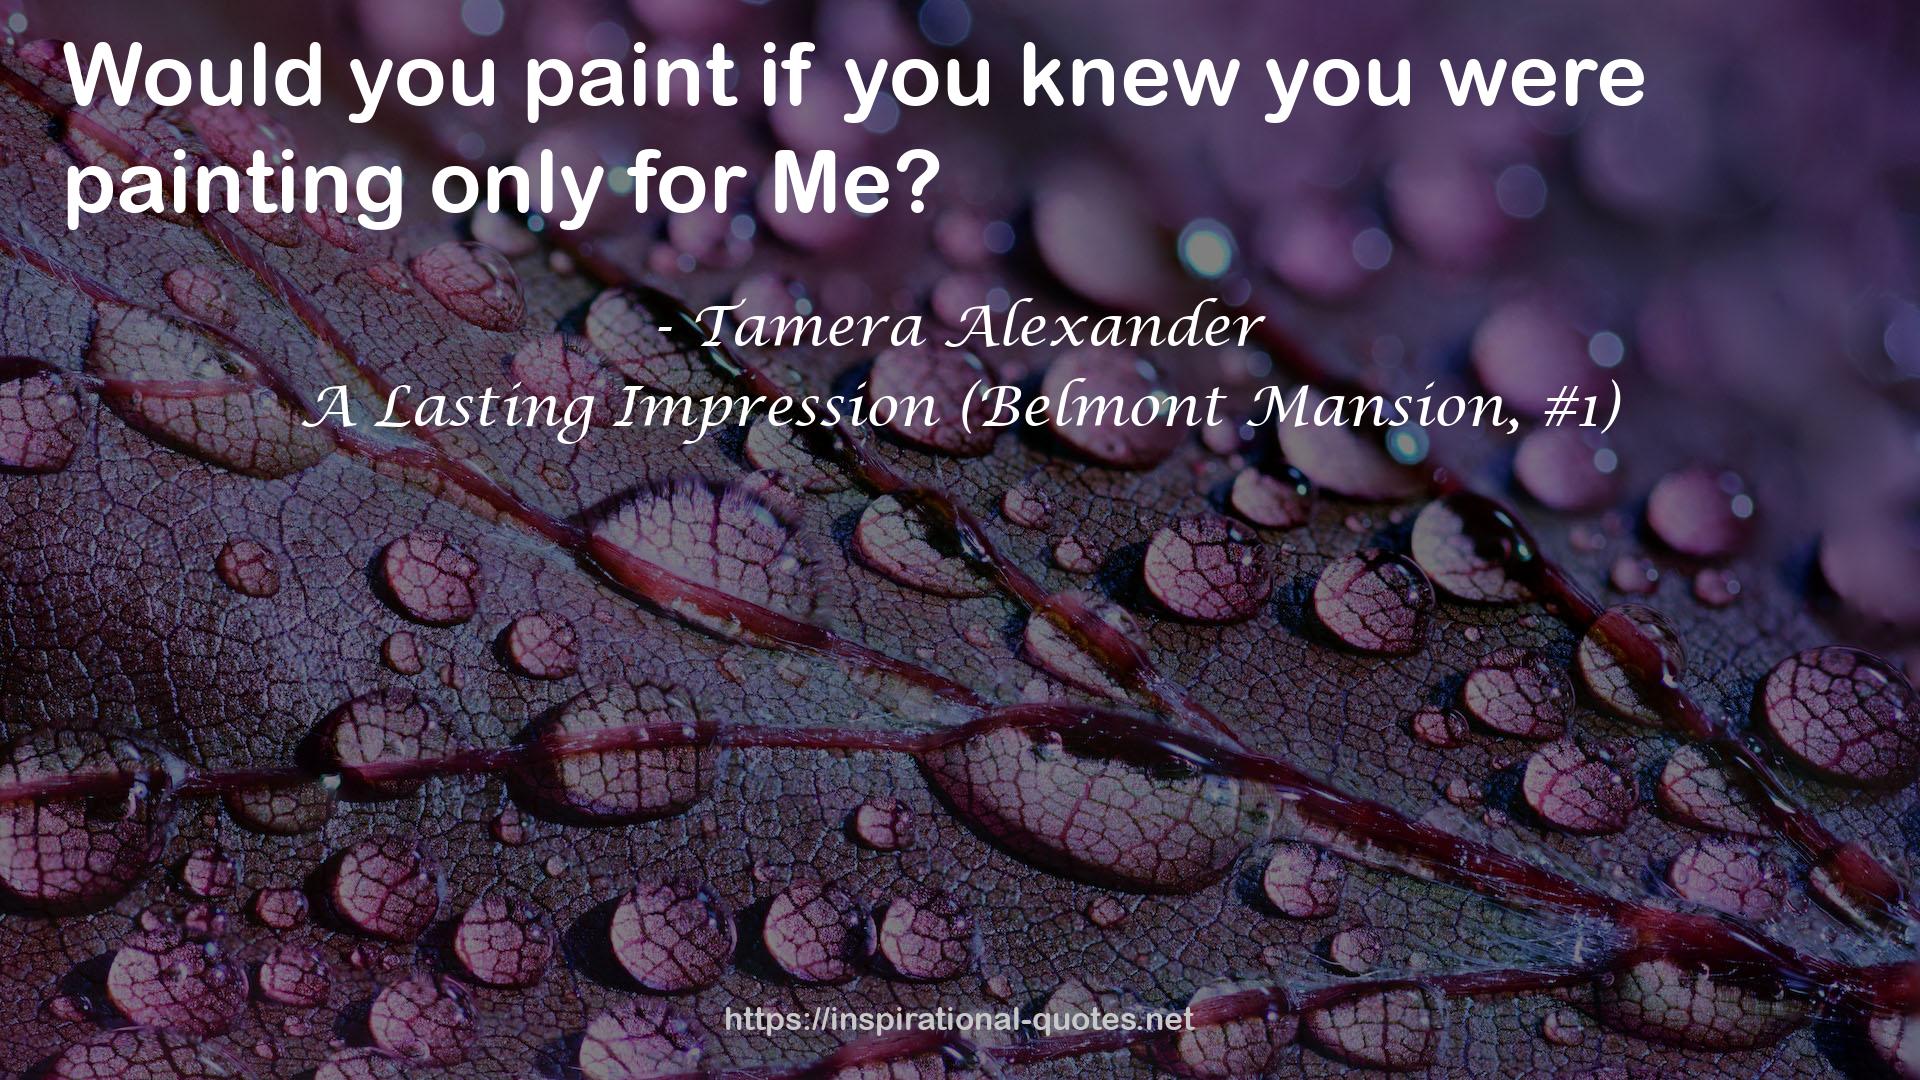 A Lasting Impression (Belmont Mansion, #1) QUOTES